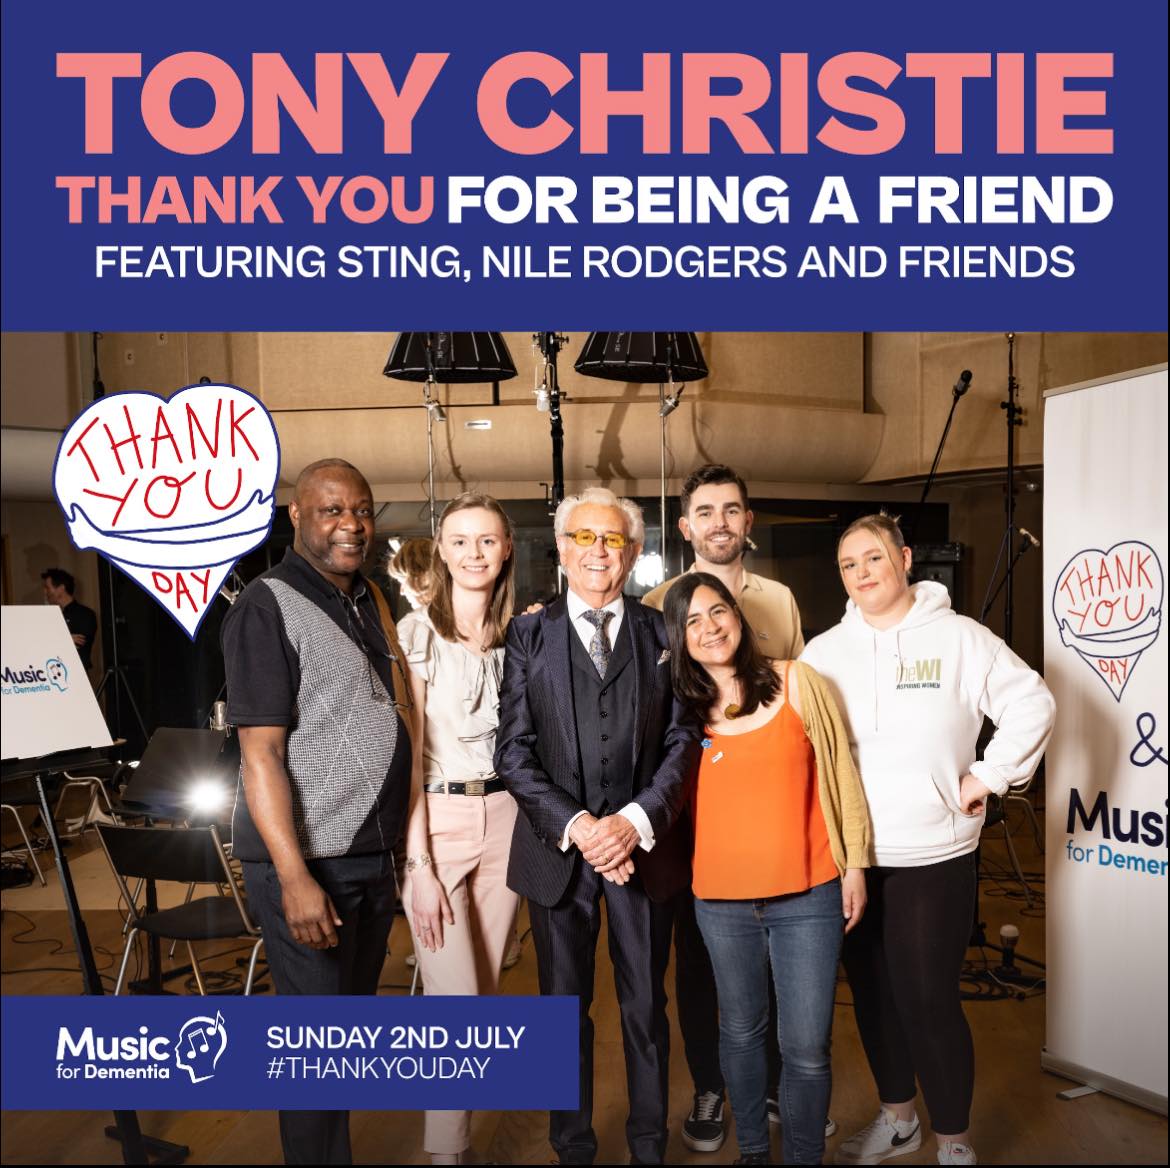 We’re so proud of our colleague Graeme Sutherland, who was chosen to take part in @MusicforDemUK charity single - ‘Thank You for Being a Friend’. We'd like to say a BIG thank you to you Graeme – and to all unsung heroes! Download the track: lnkd.in/gN8-pVA #ThankYouDay